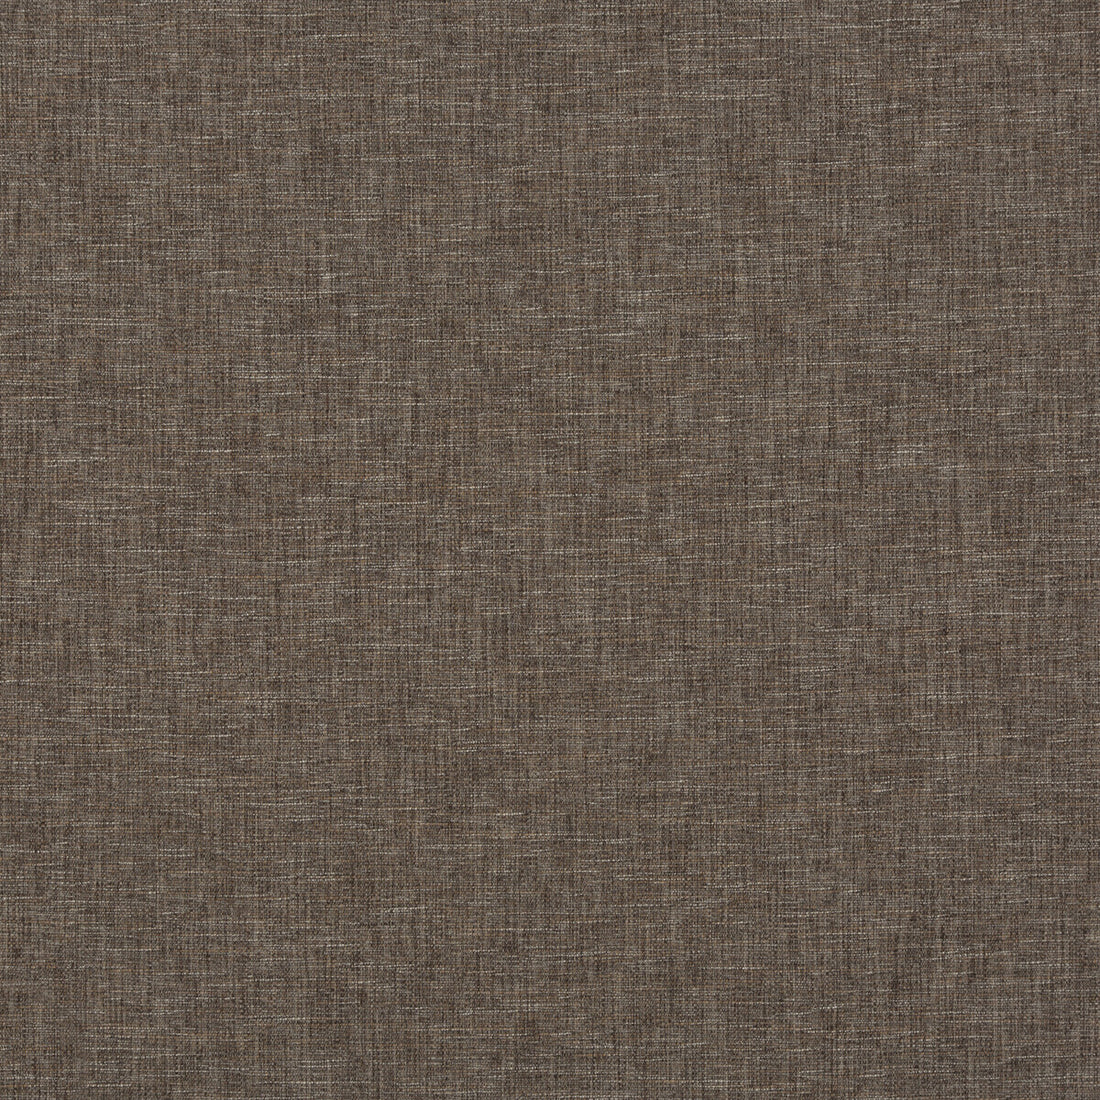 Kinnerton fabric in woodsmoke color - pattern PF50414.935.0 - by Baker Lifestyle in the Notebooks collection